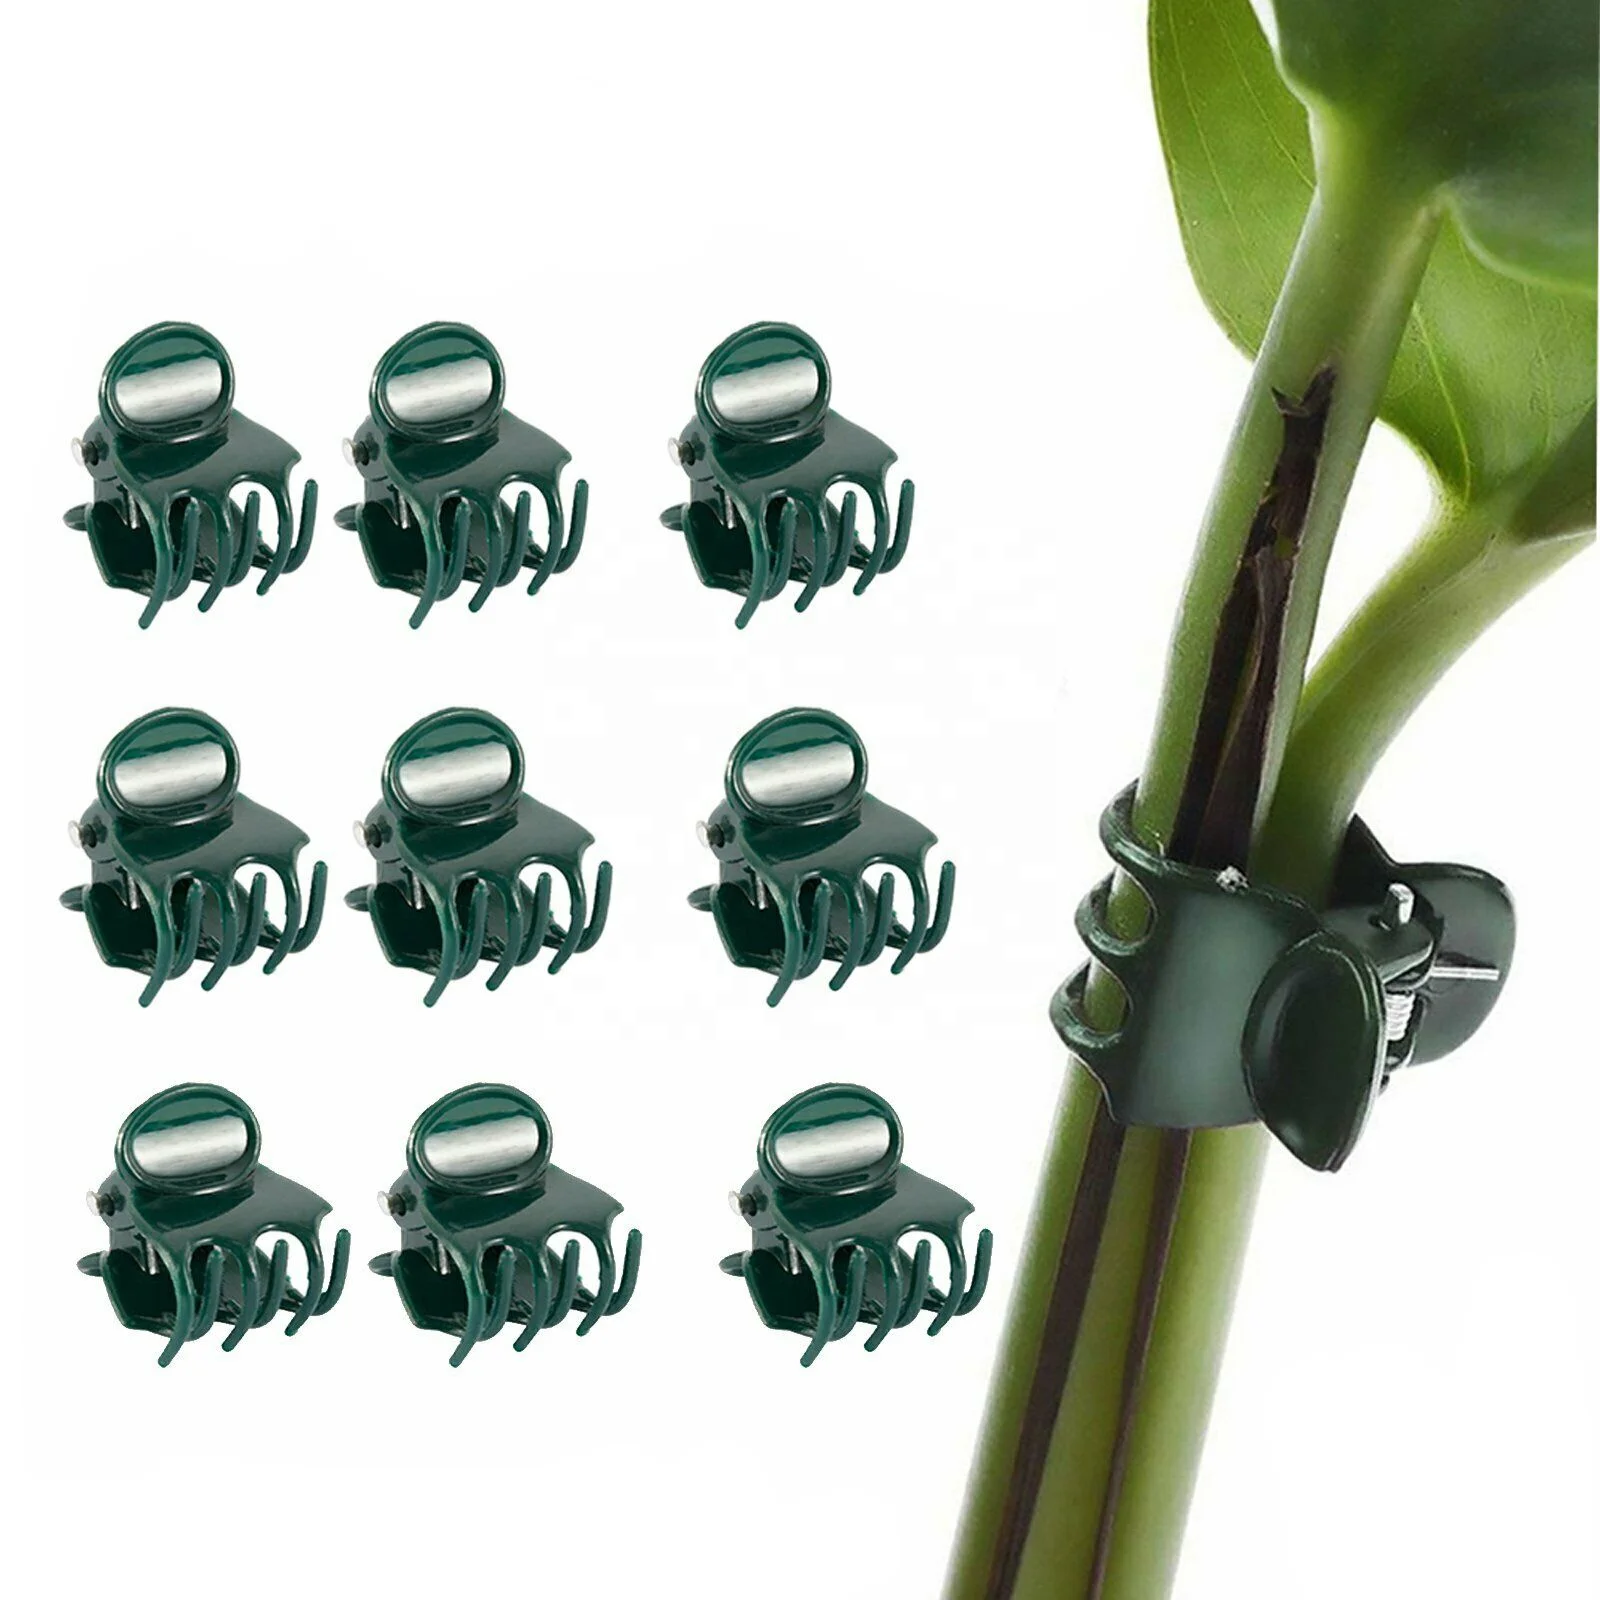 

Bag Of 100 Plant Holding Clips Orchid Clips to Support Stems Stems to Grow Vertically and Make Vegetable Plants Healthier